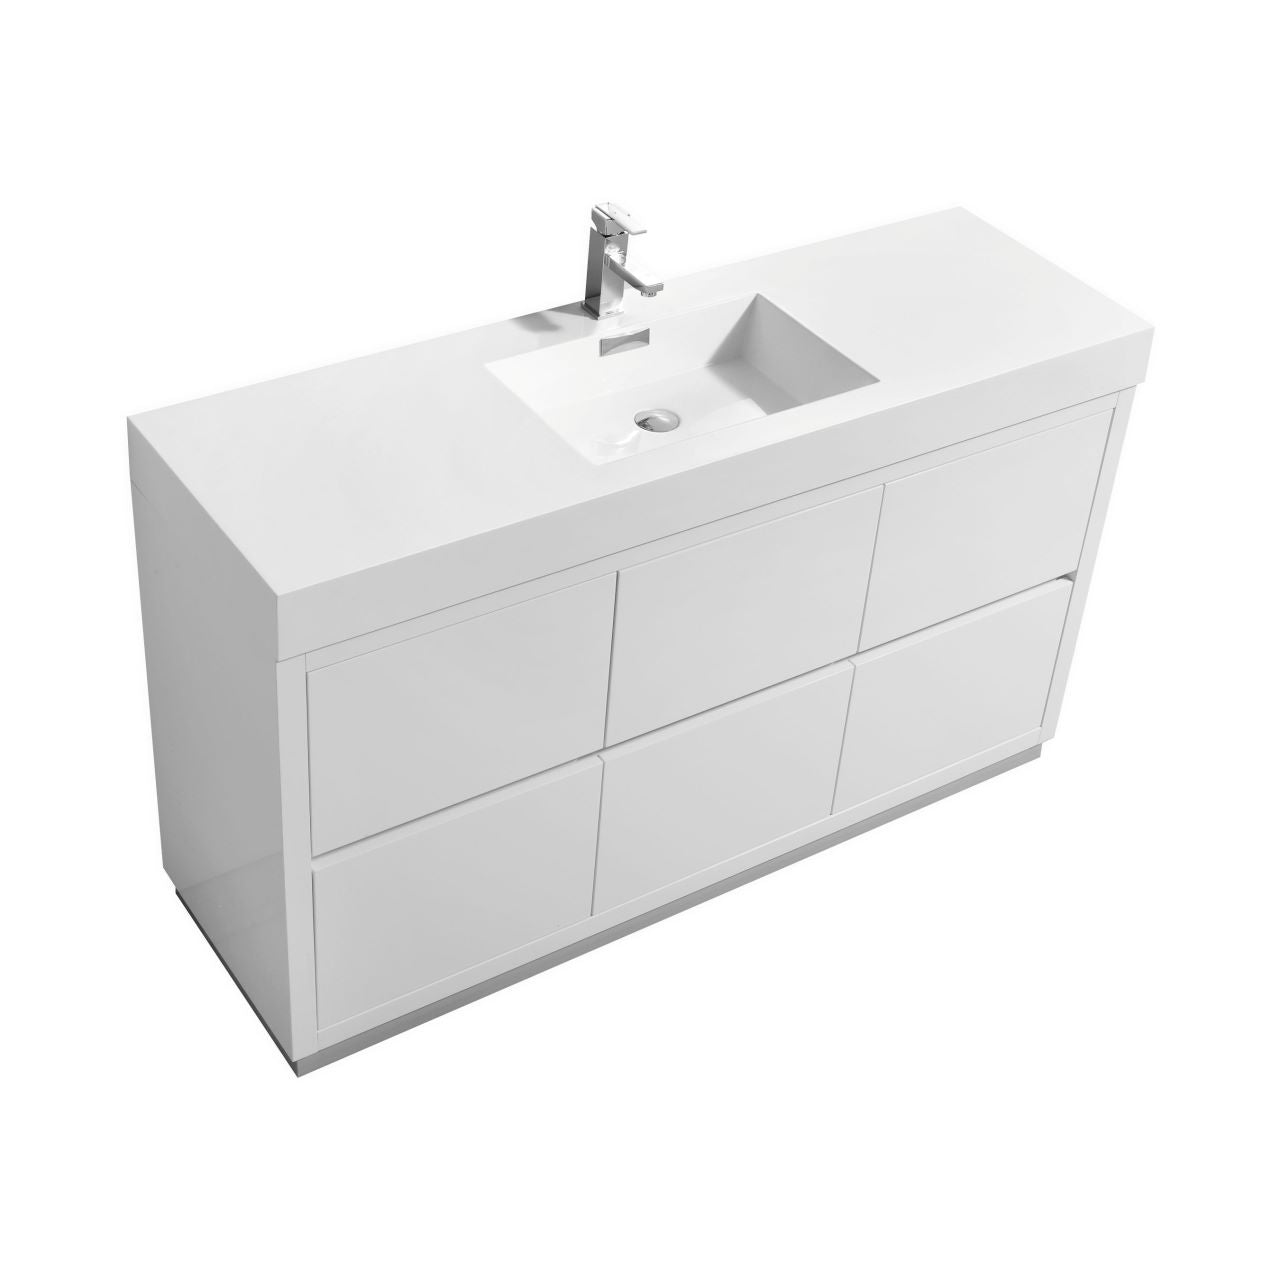 KUBEBATH Bliss FMB60S-GW 60" Single Bathroom Vanity in High Gloss White with White Acrylic Composite, Integrated Sink, Angled View